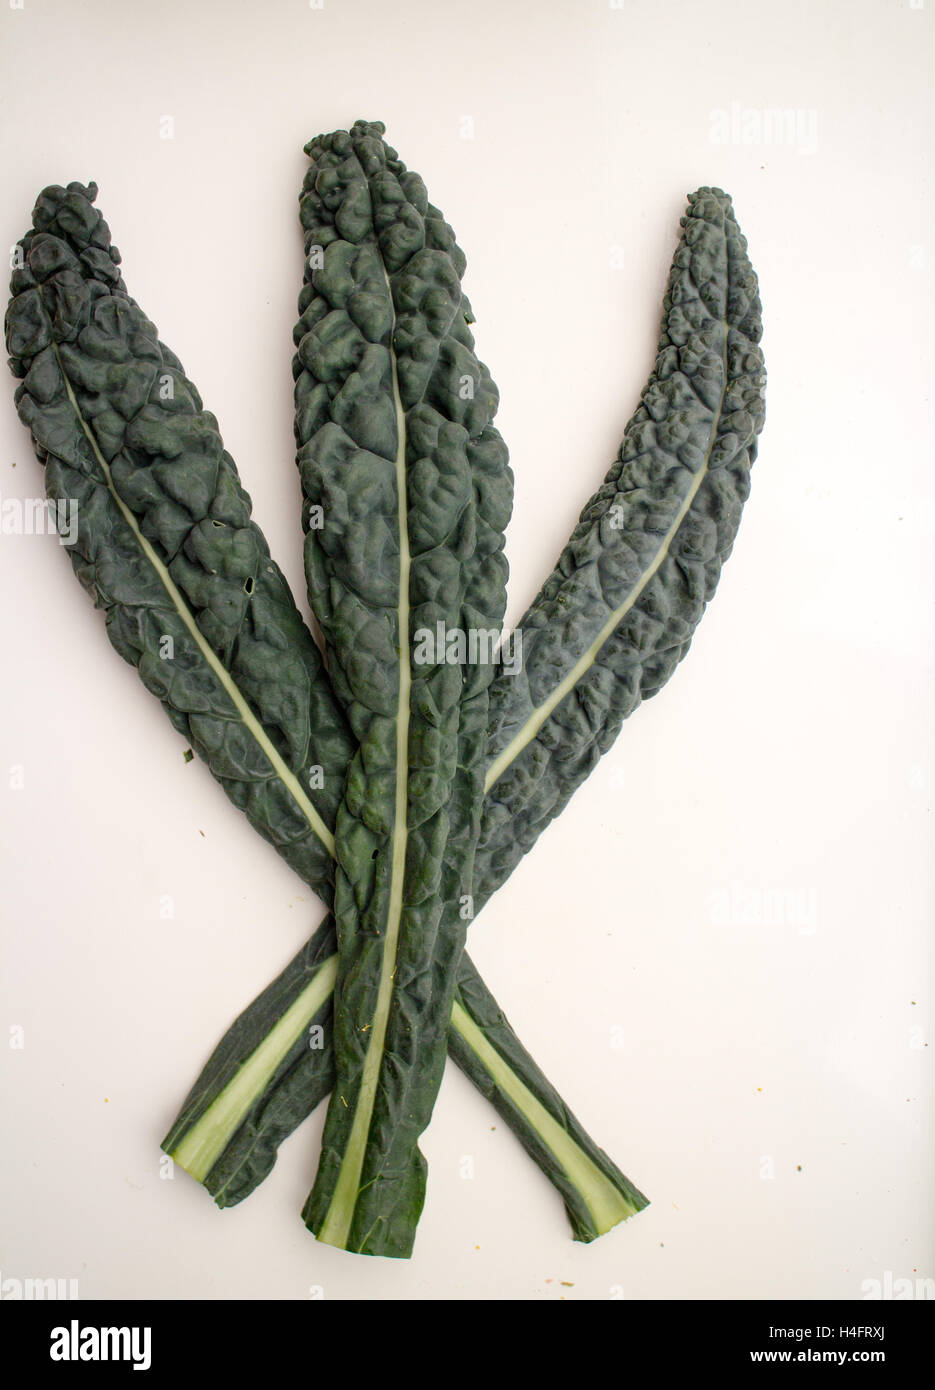 3 dinosaur kale or lacinato kale to be made into a creation, food inspired Stock Photo